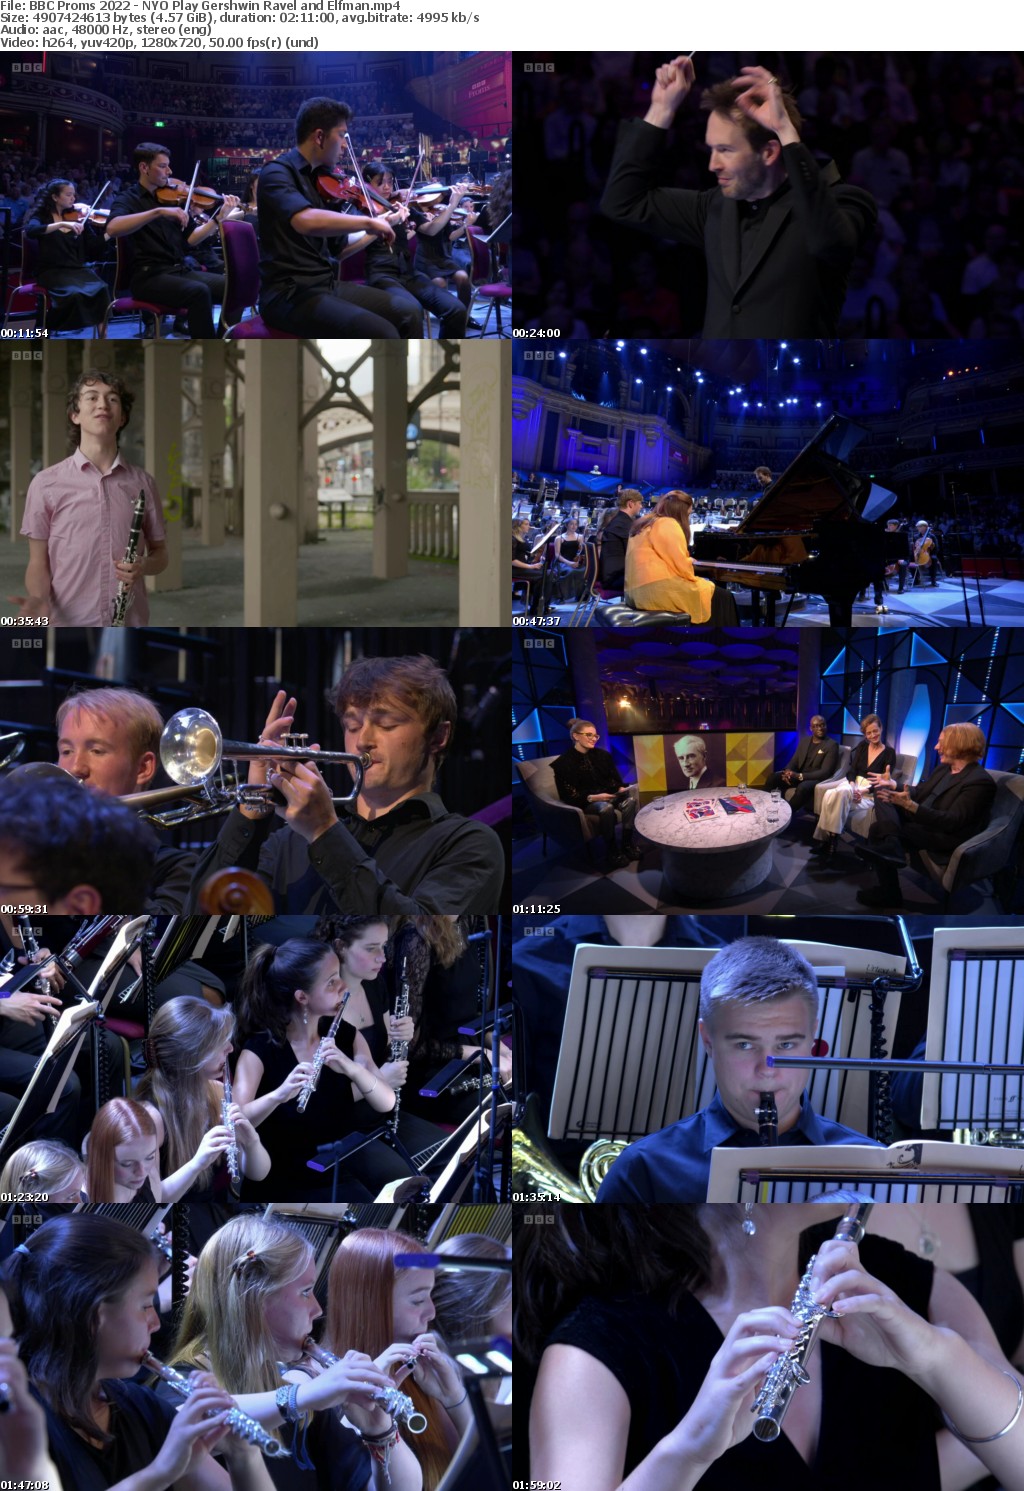 BBC Proms 2022 - NYO Play Gershwin Ravel and Elfman (1280x720p HD, 50fps, soft Eng subs)